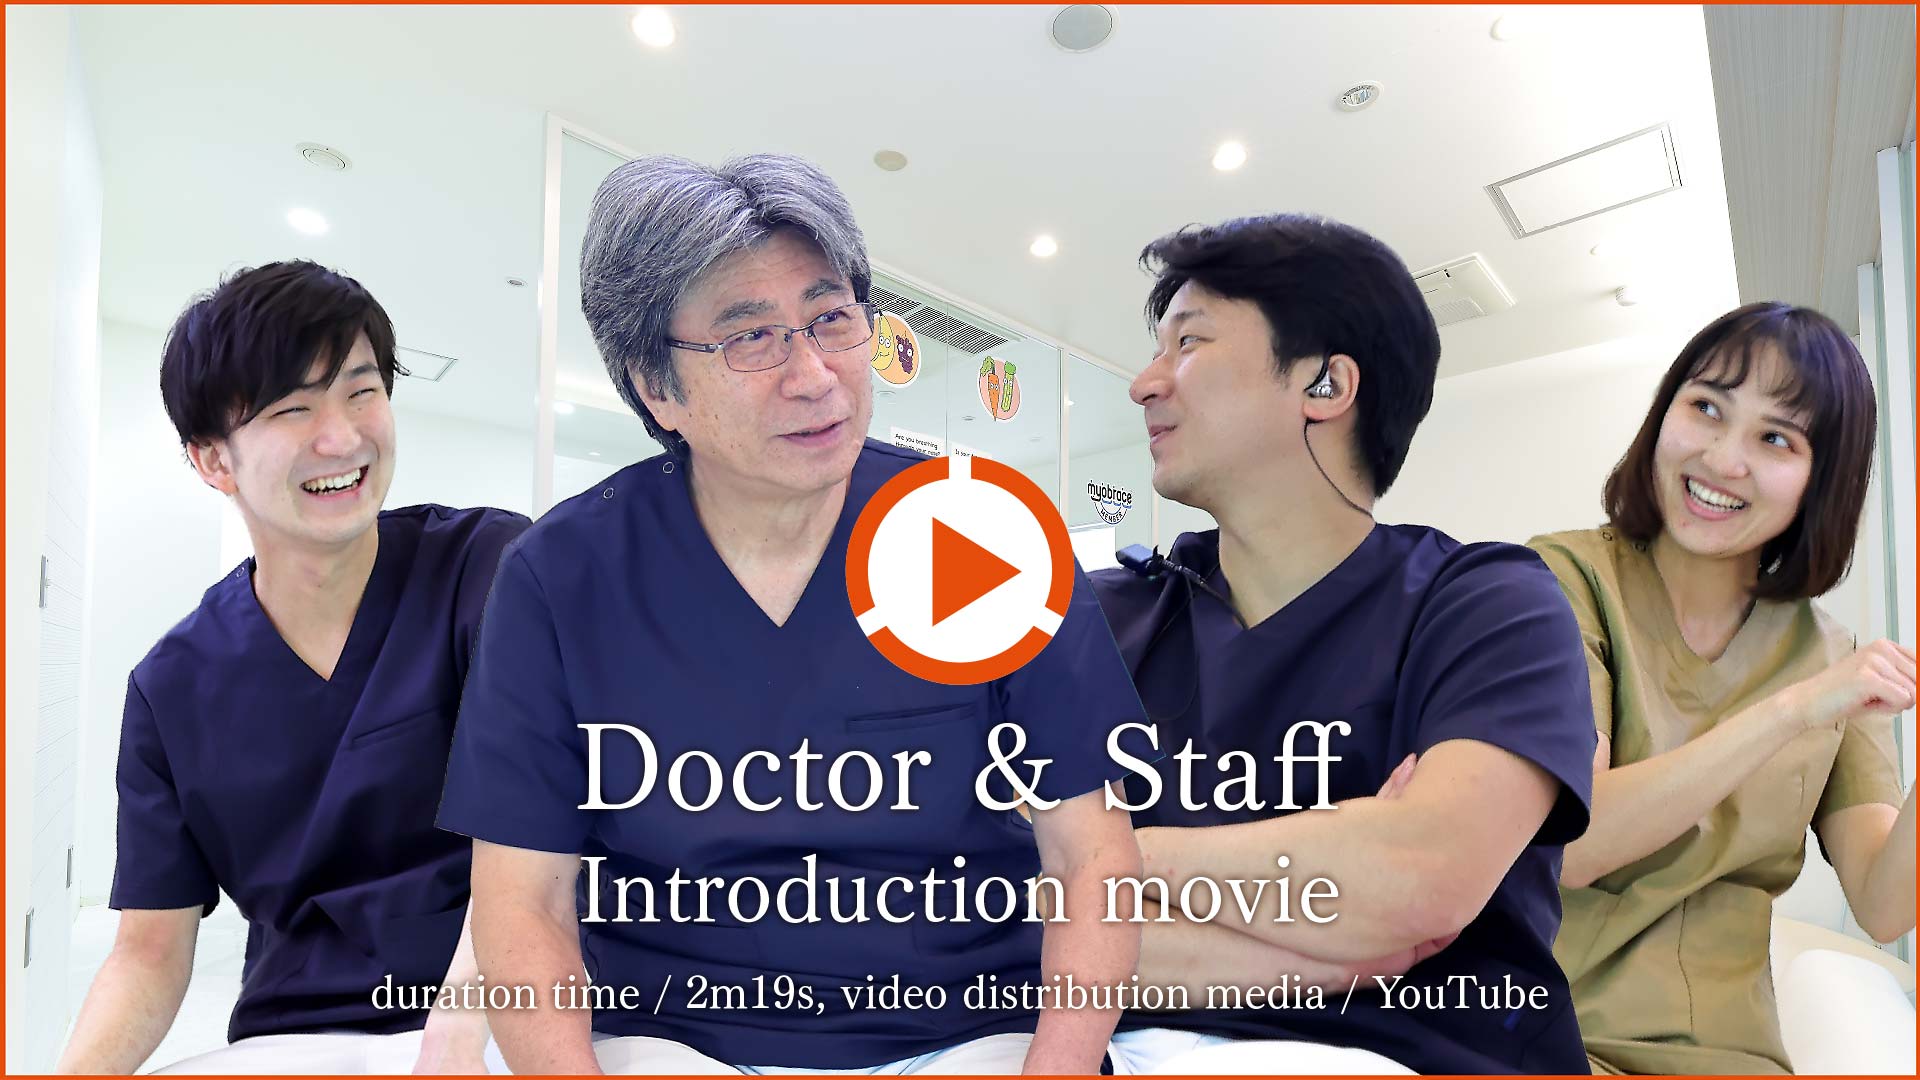 Doctor & Staff Introduction movie